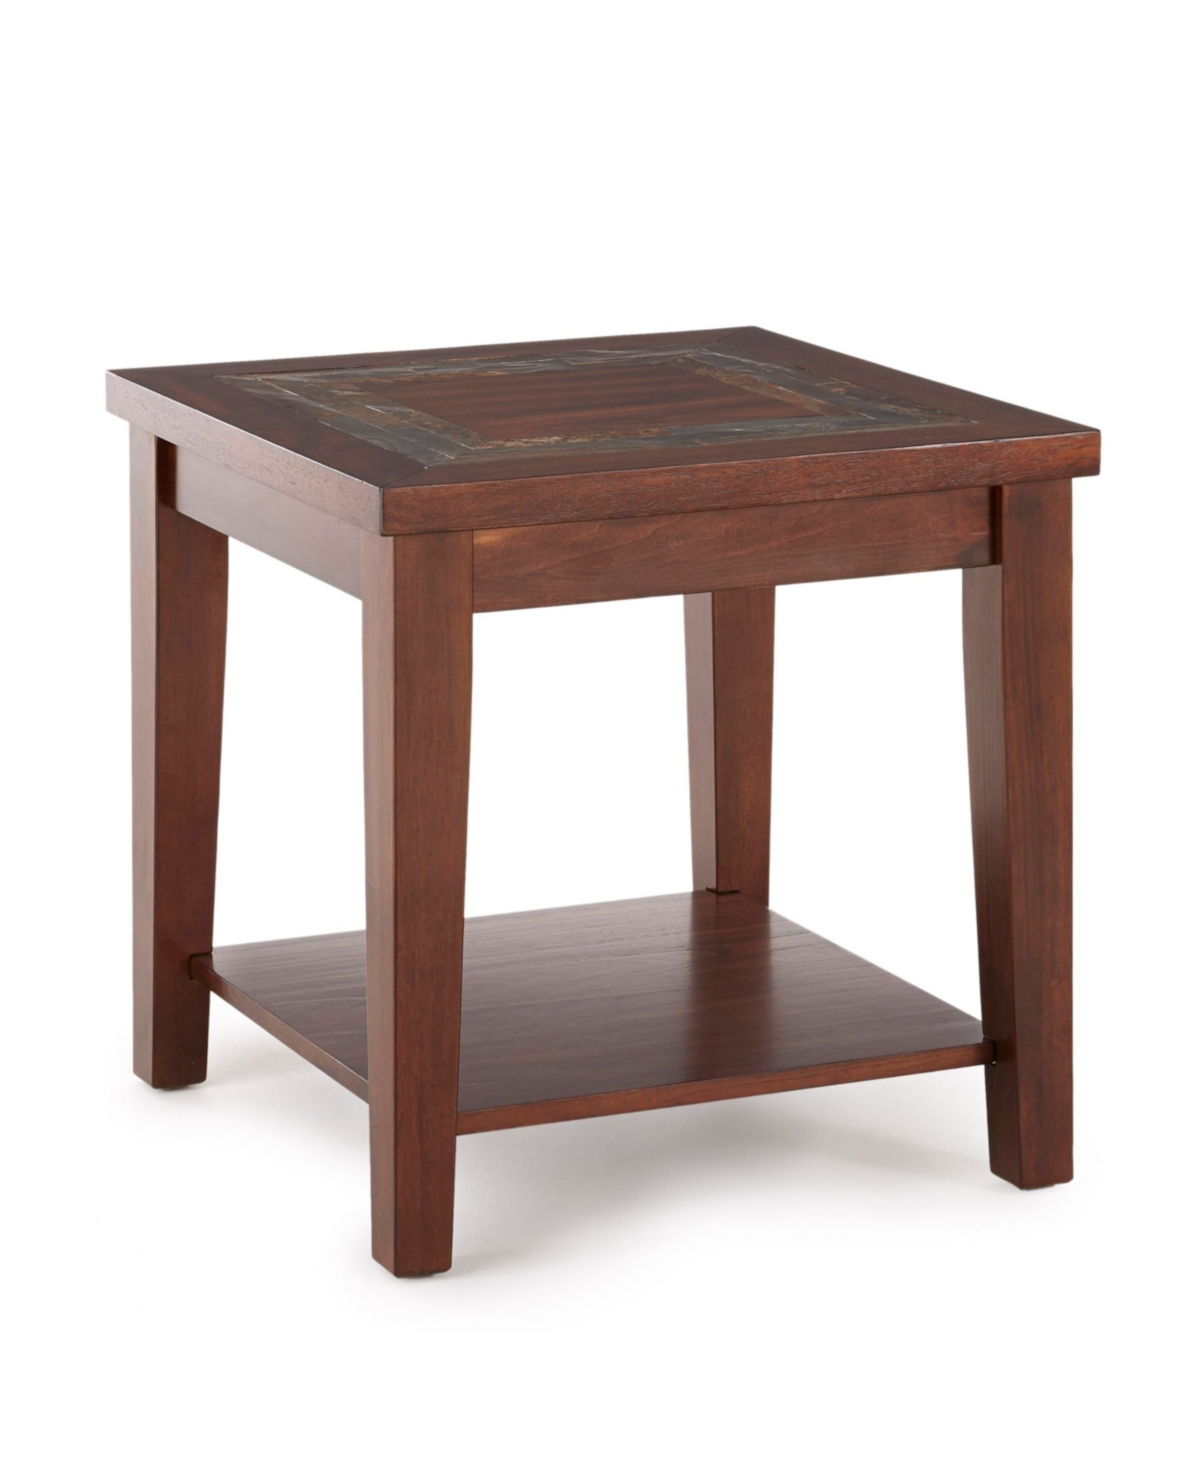 Steve Silver 24" Wood Davenport End Table In Medium Brown Cherry Finish With Burnishi